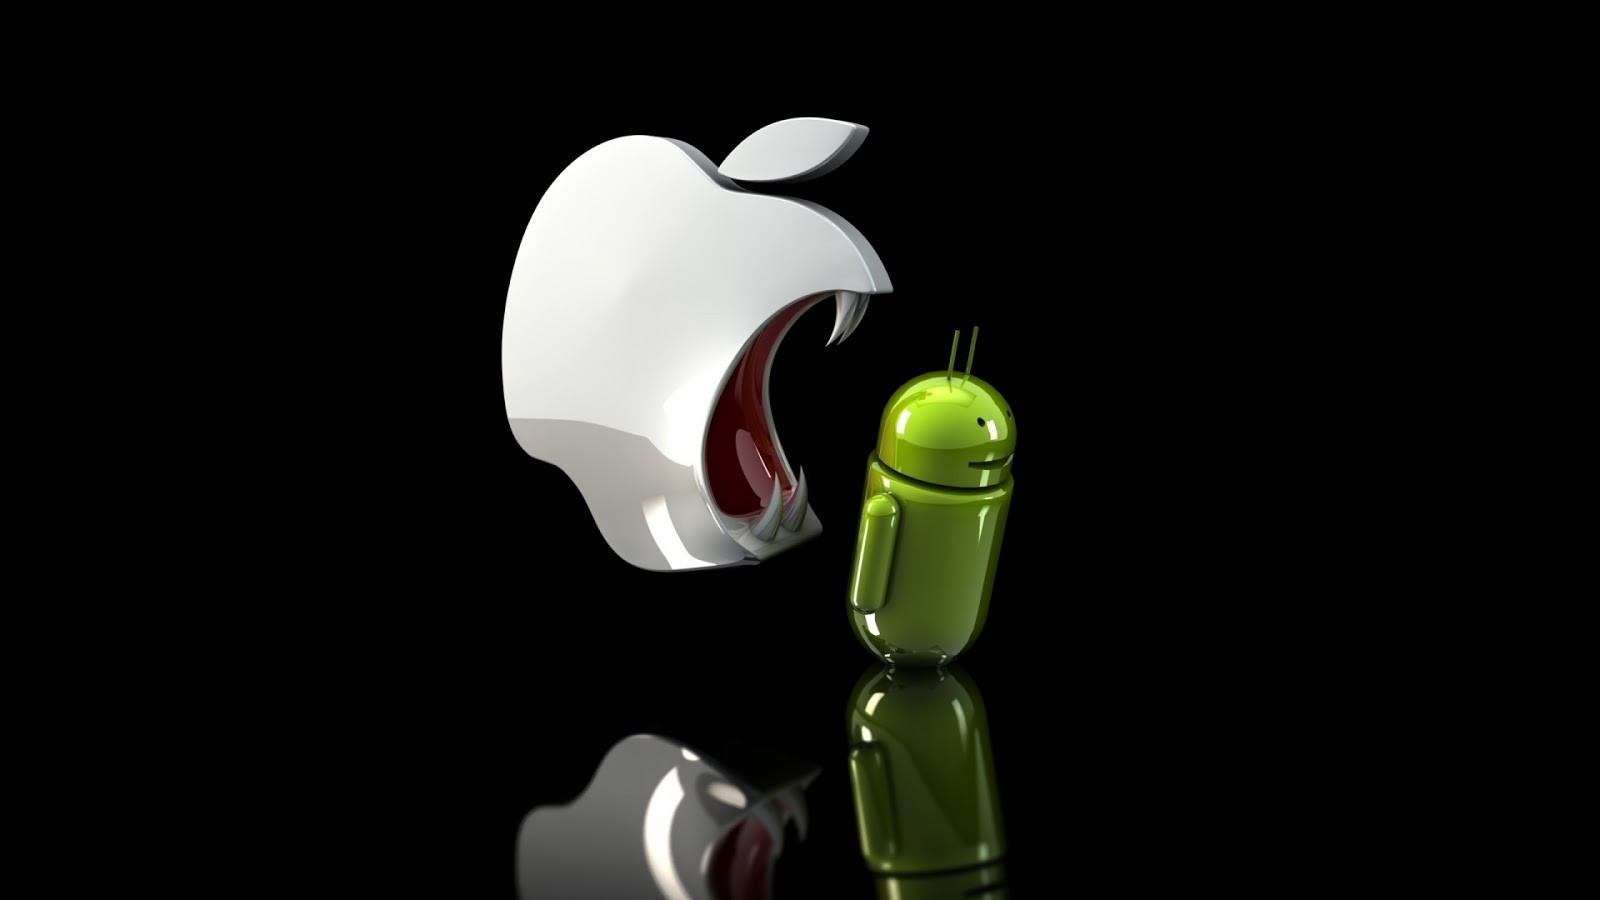 General 1600x900 Apple Inc. Android (operating system) CGI humor reflection digital art black background simple background